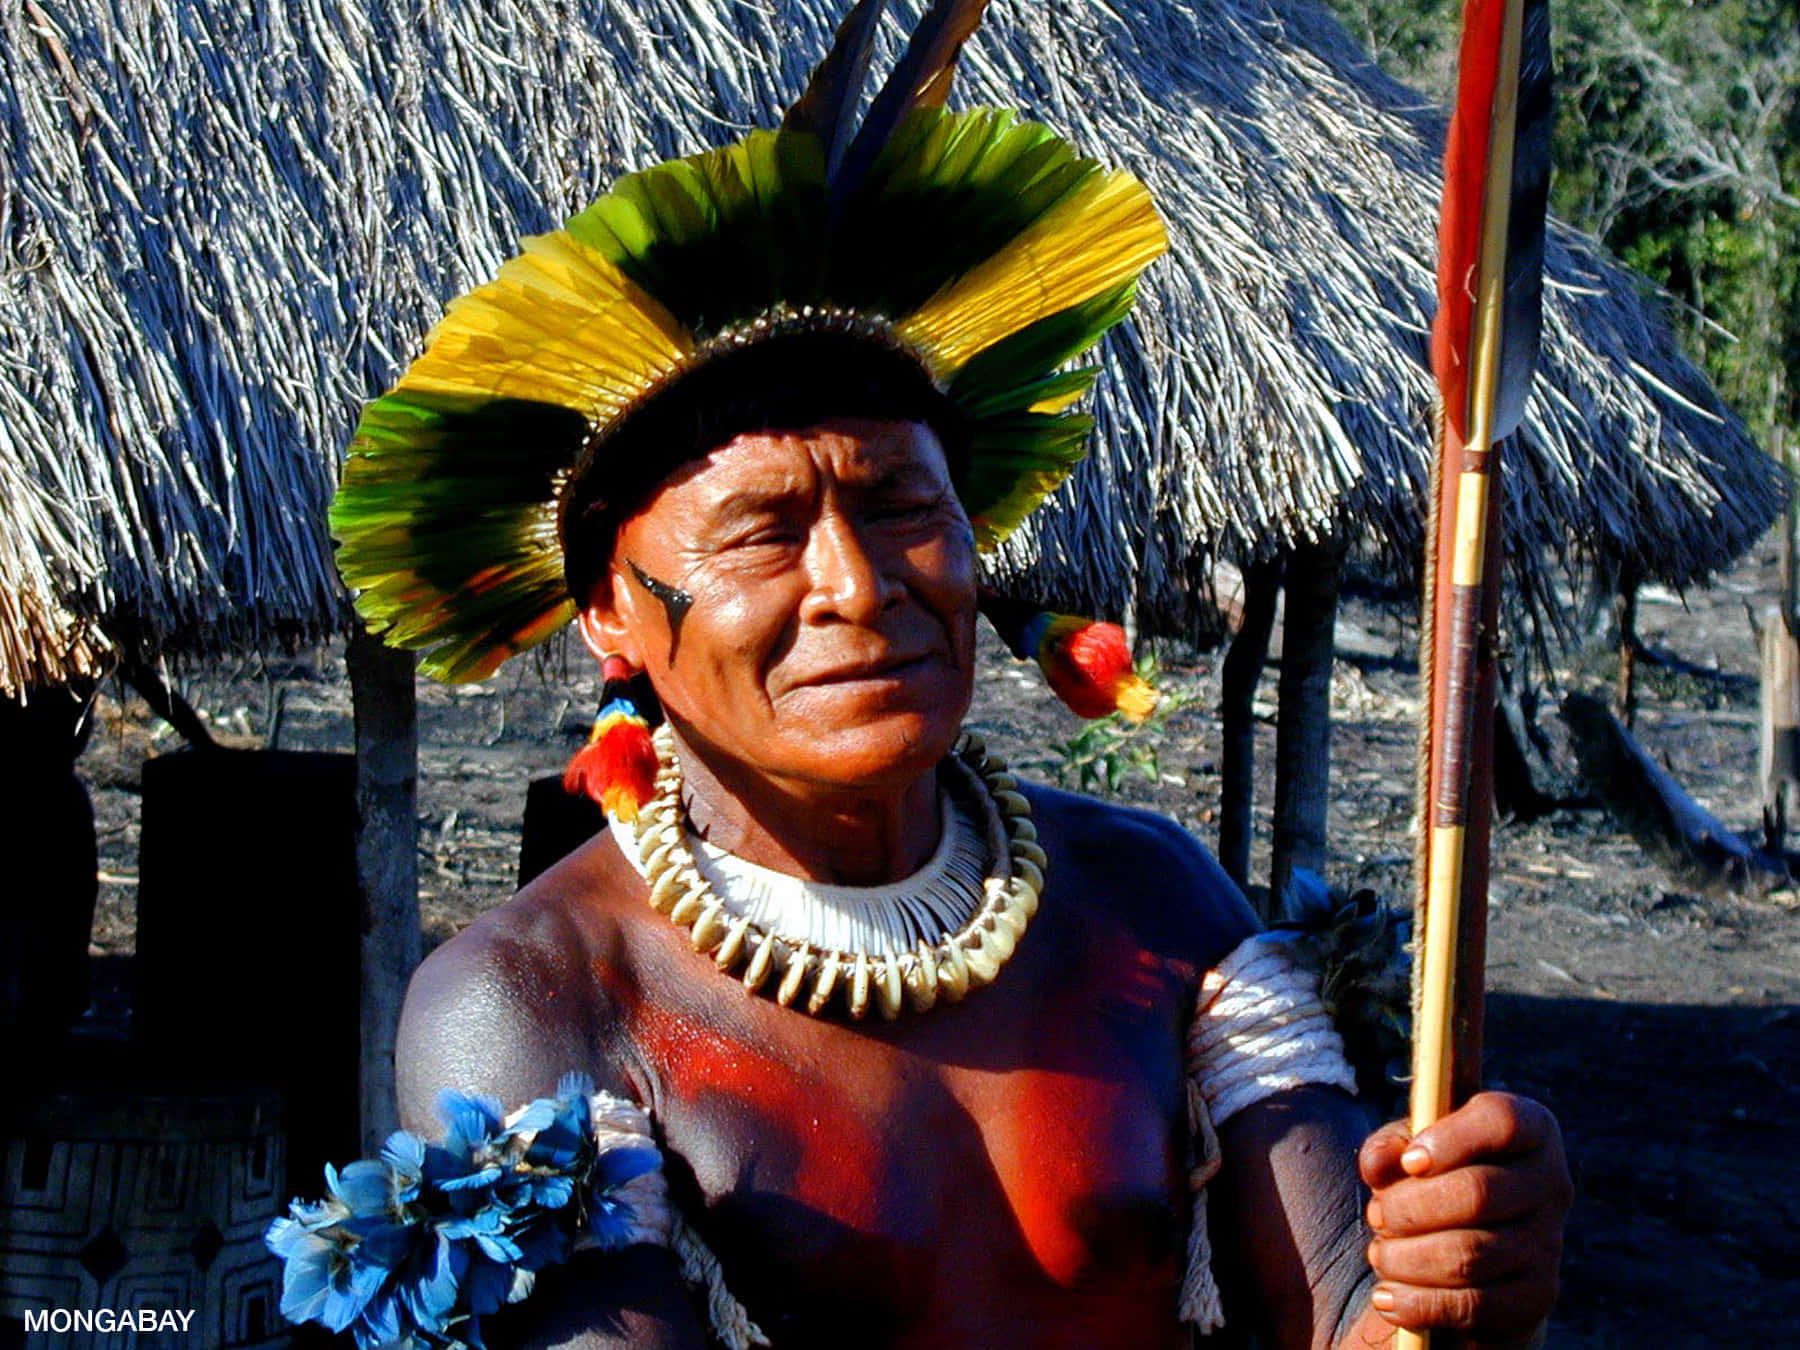 A Man With A Feathered Headdress